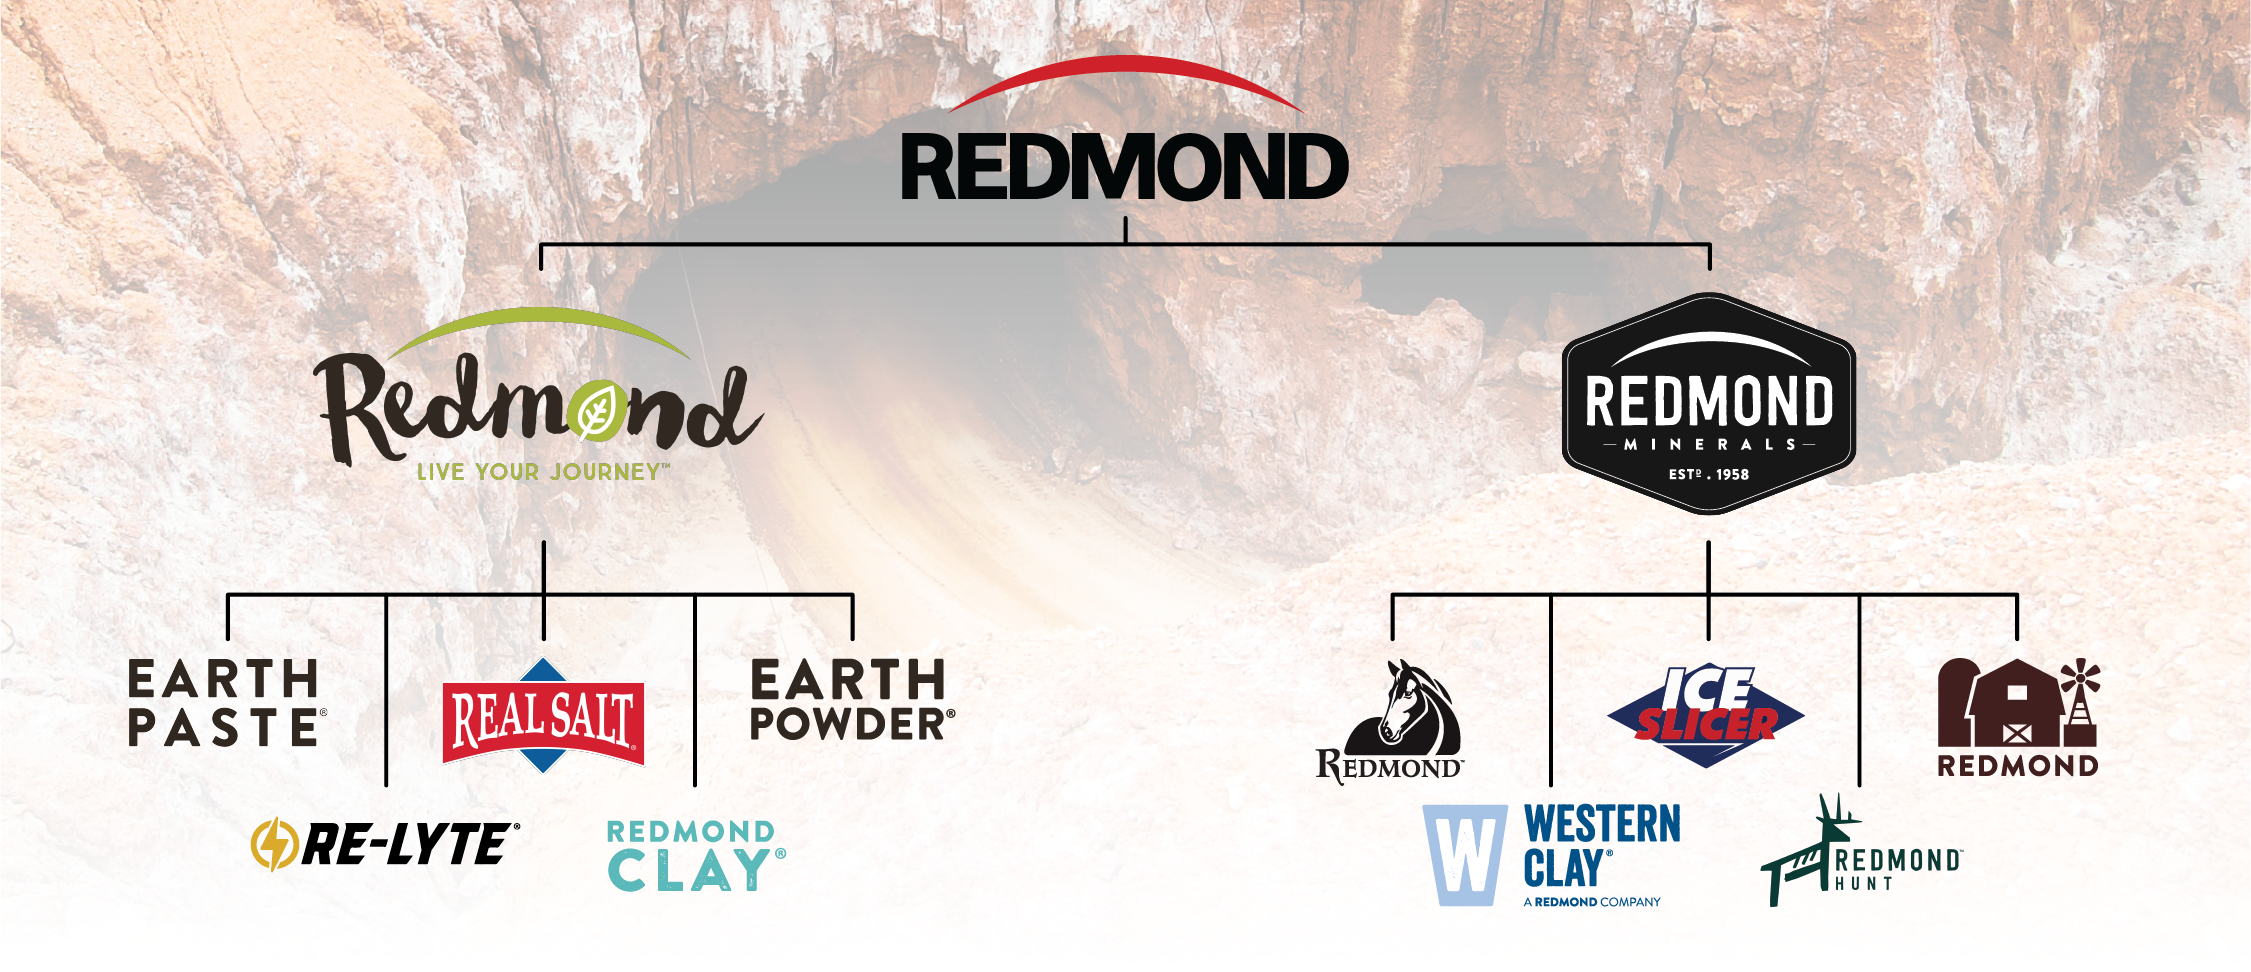 The Redmond family of products